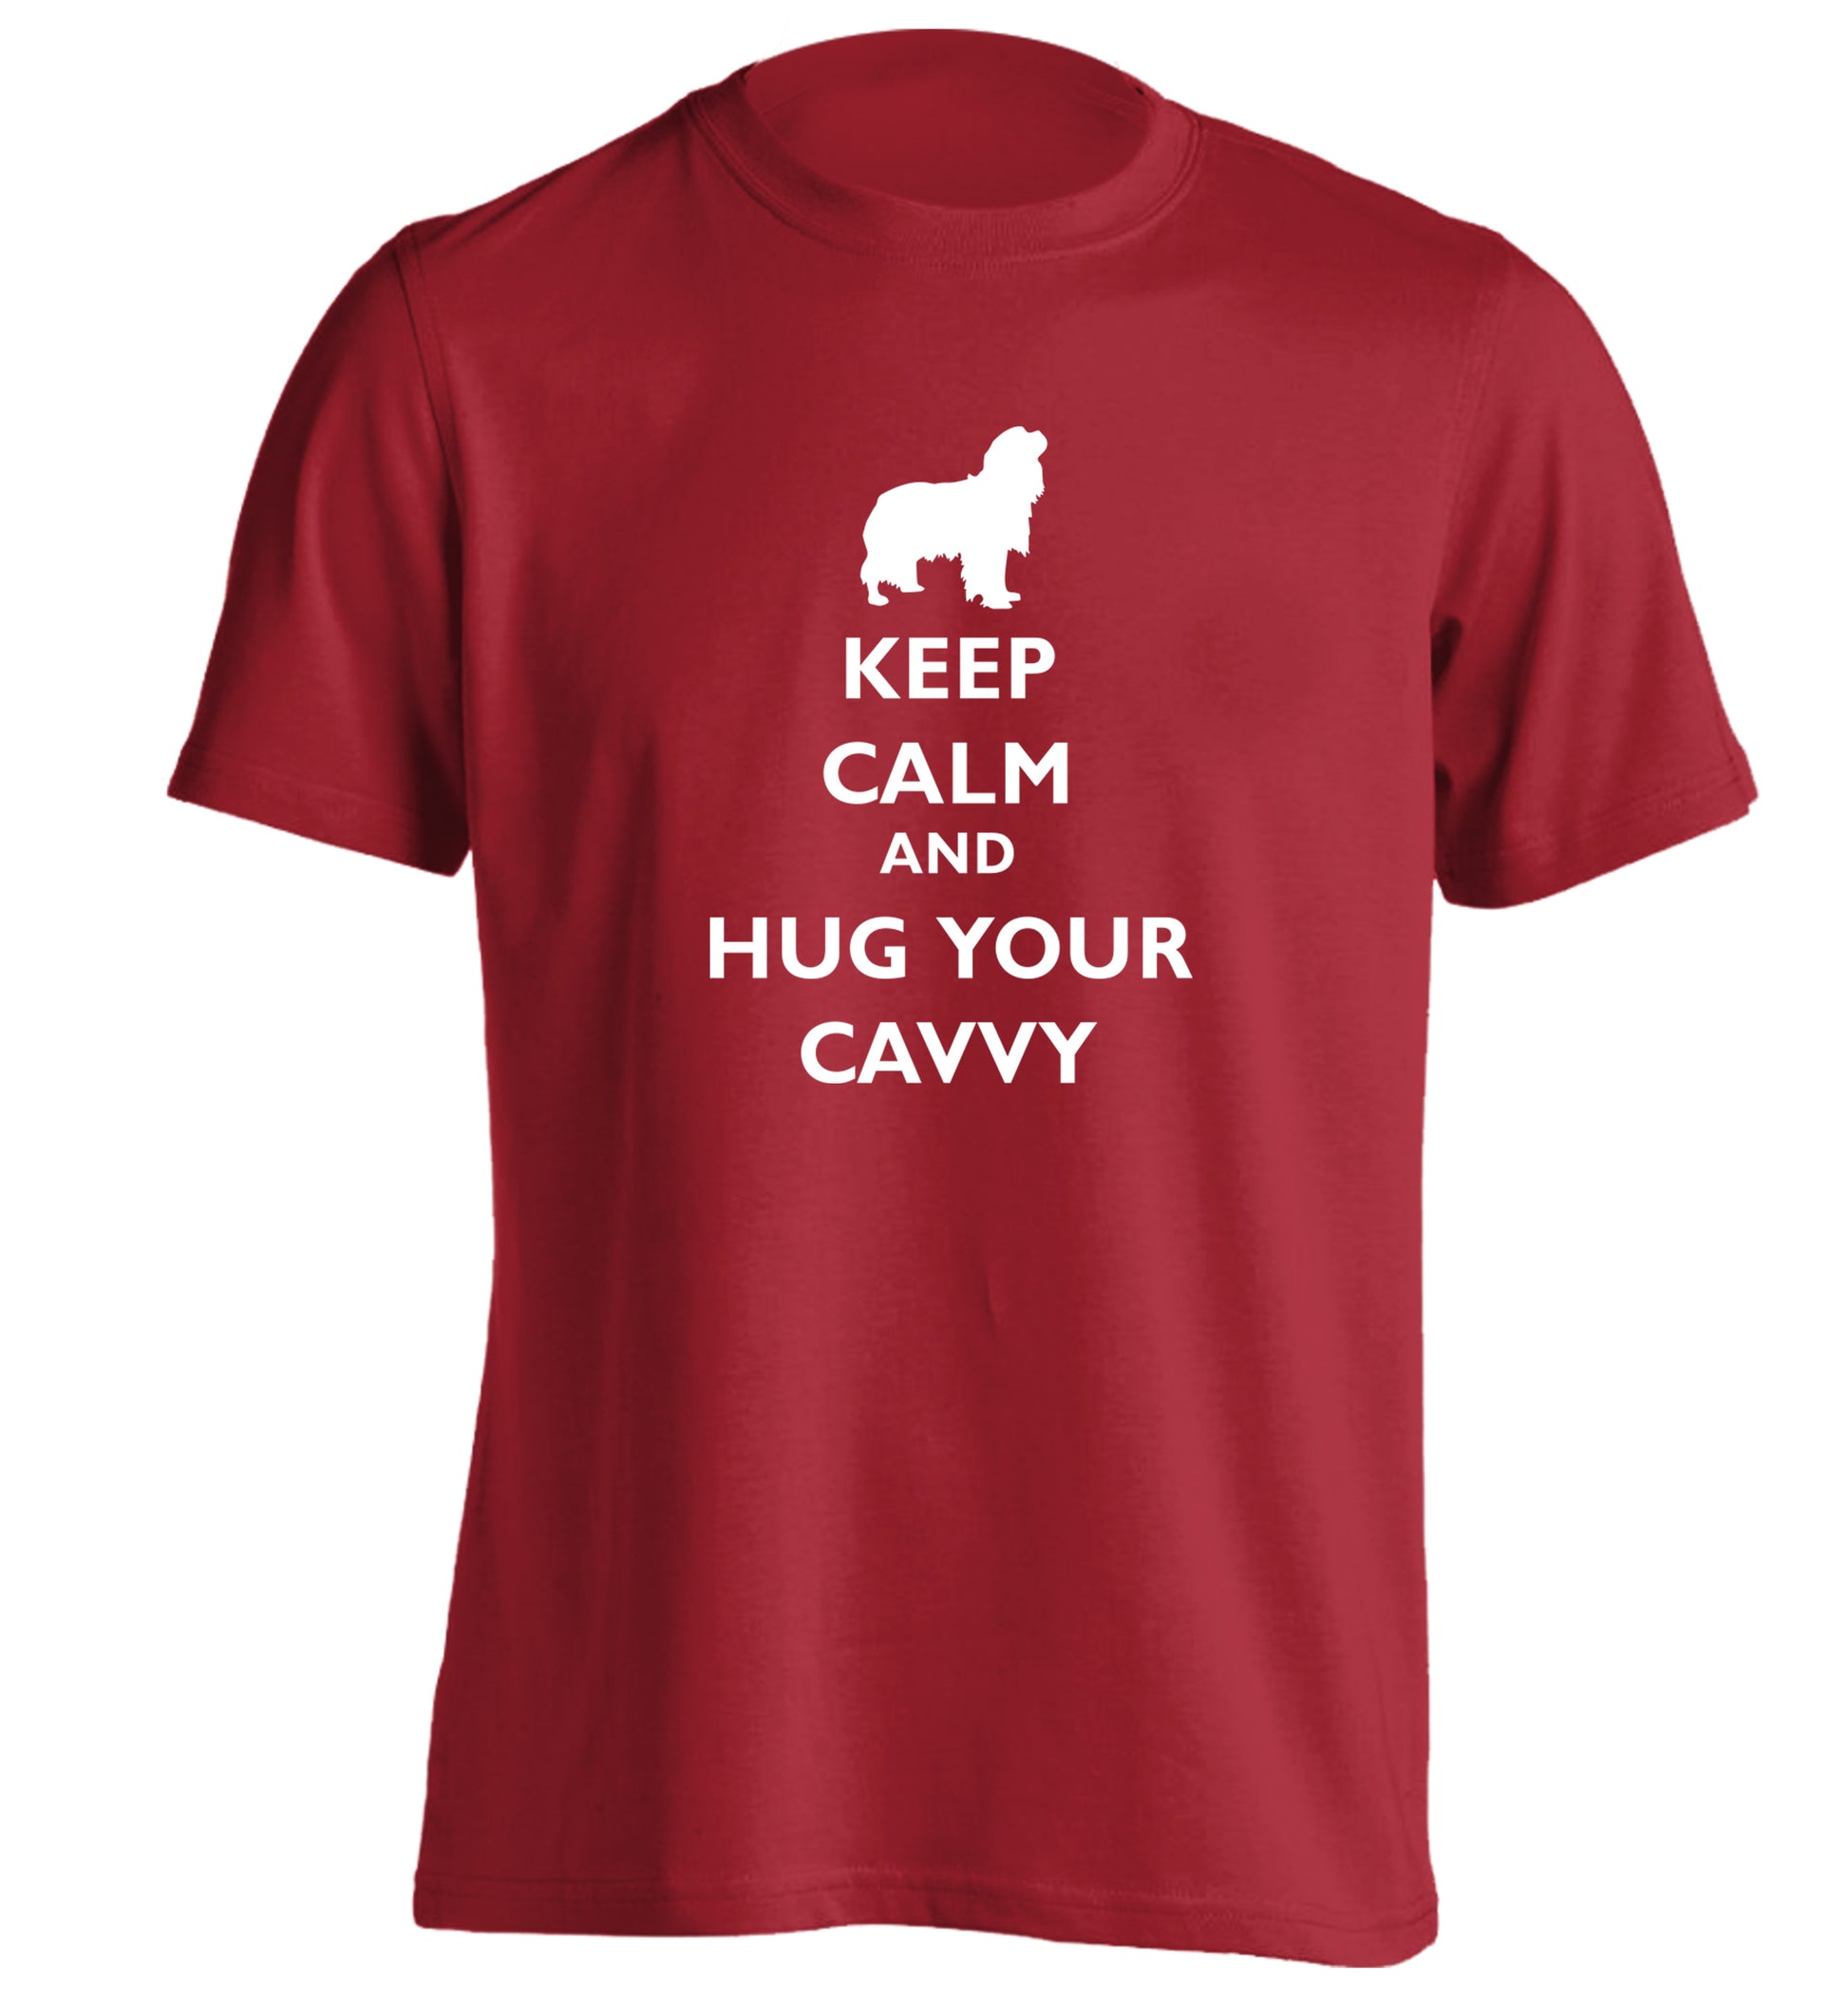 Keep calm and hug your cavvy adults unisex red Tshirt 2XL